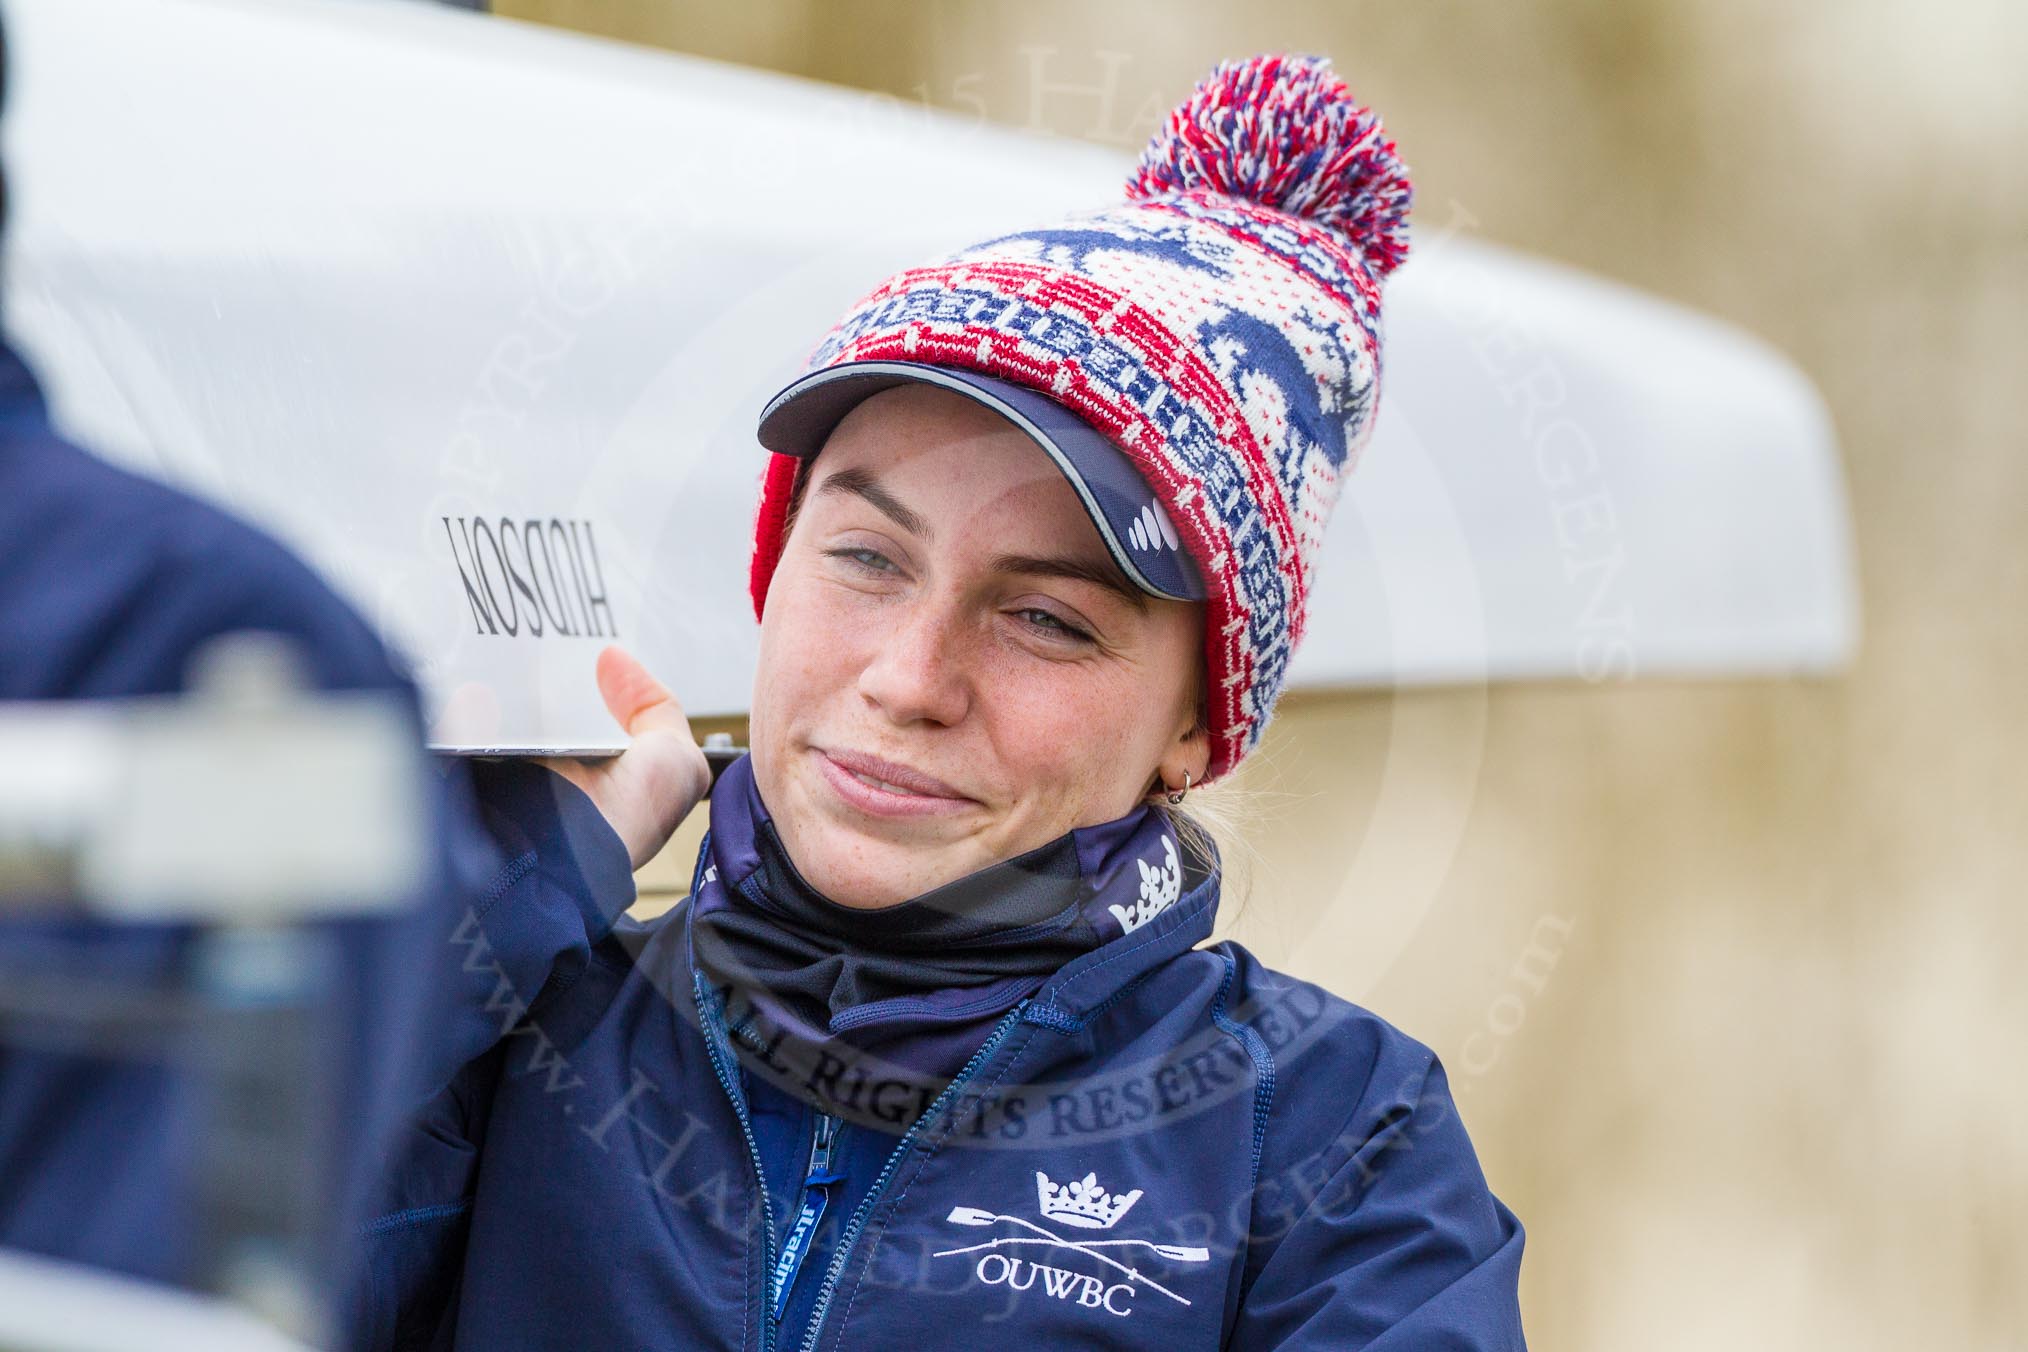 The Boat Race season 2016 - OUWBC training Wallingford: Flo Pickles, stroke in Osiris, the OUWBC reserve boat.
River Thames,
Wallingford,
Oxfordshire,

on 29 February 2016 at 15:15, image #30